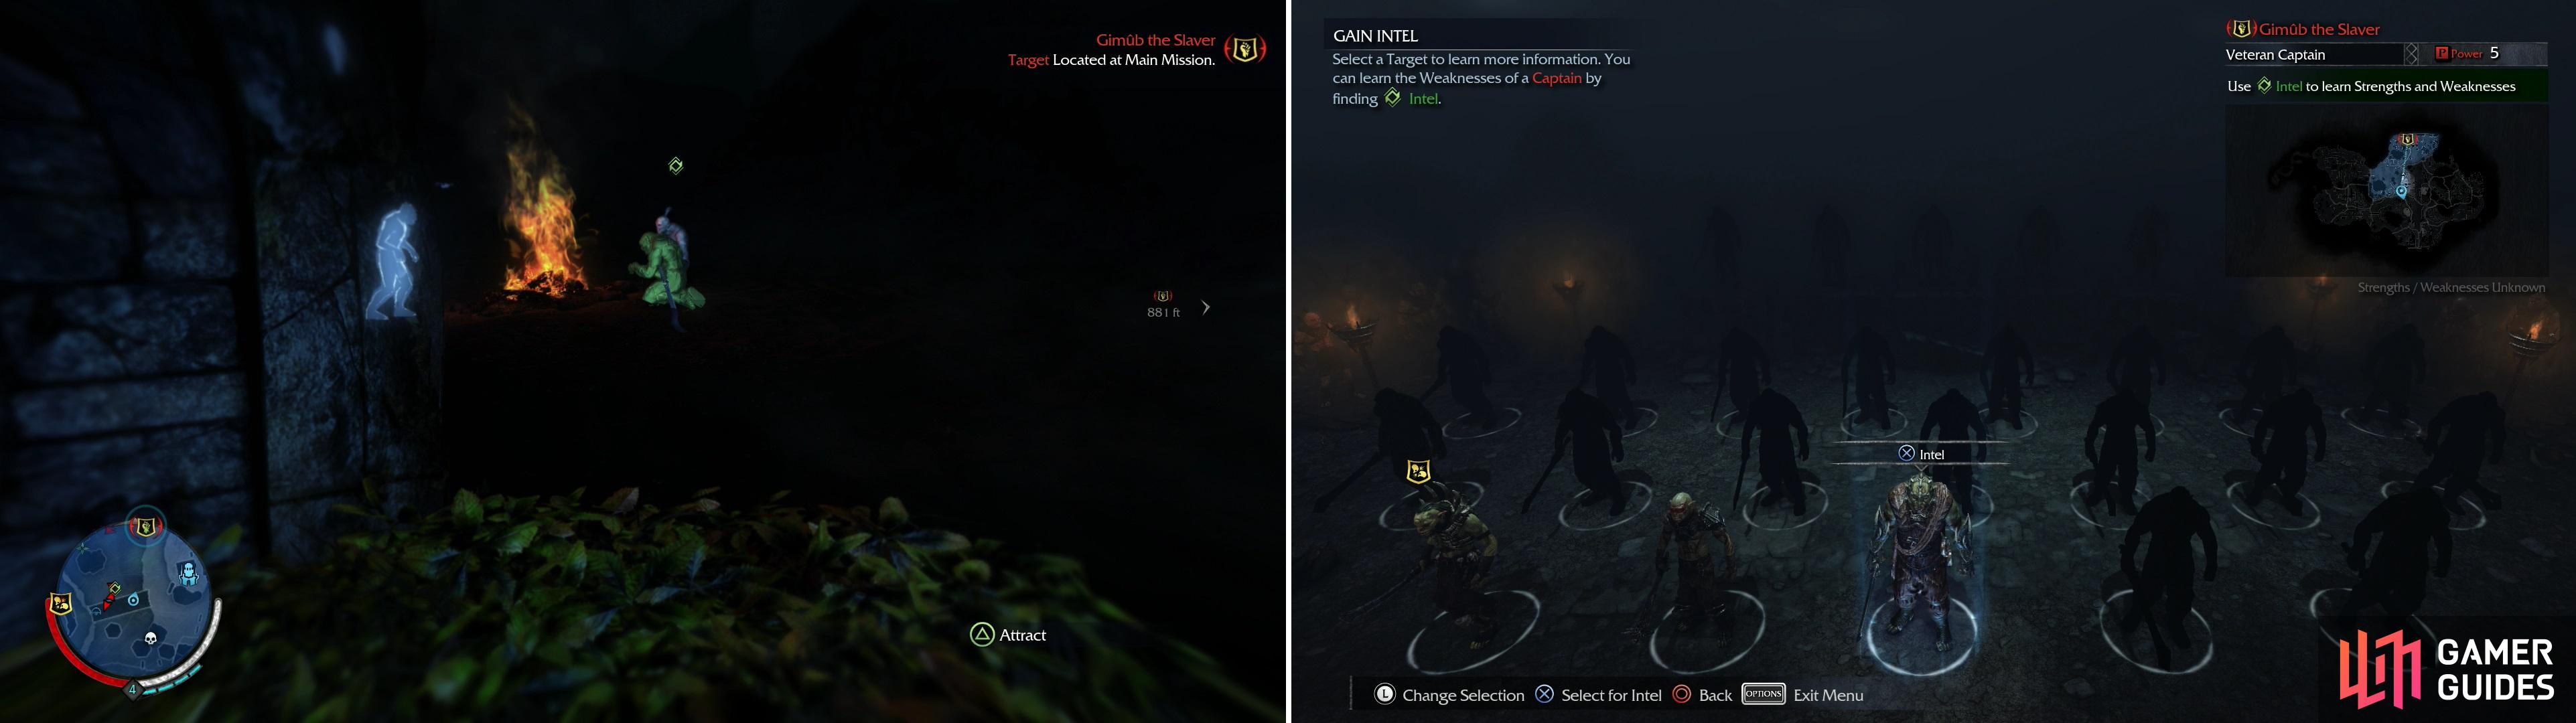 Worms are one common source of Intel-Uruks who, once Interrogated by the Wraith will divulge their precious knowledge about their masters. They have a green icon over them, and glow green in Wraith Vision (left). Gain Intel to learn more about Sauron’s Army (right).